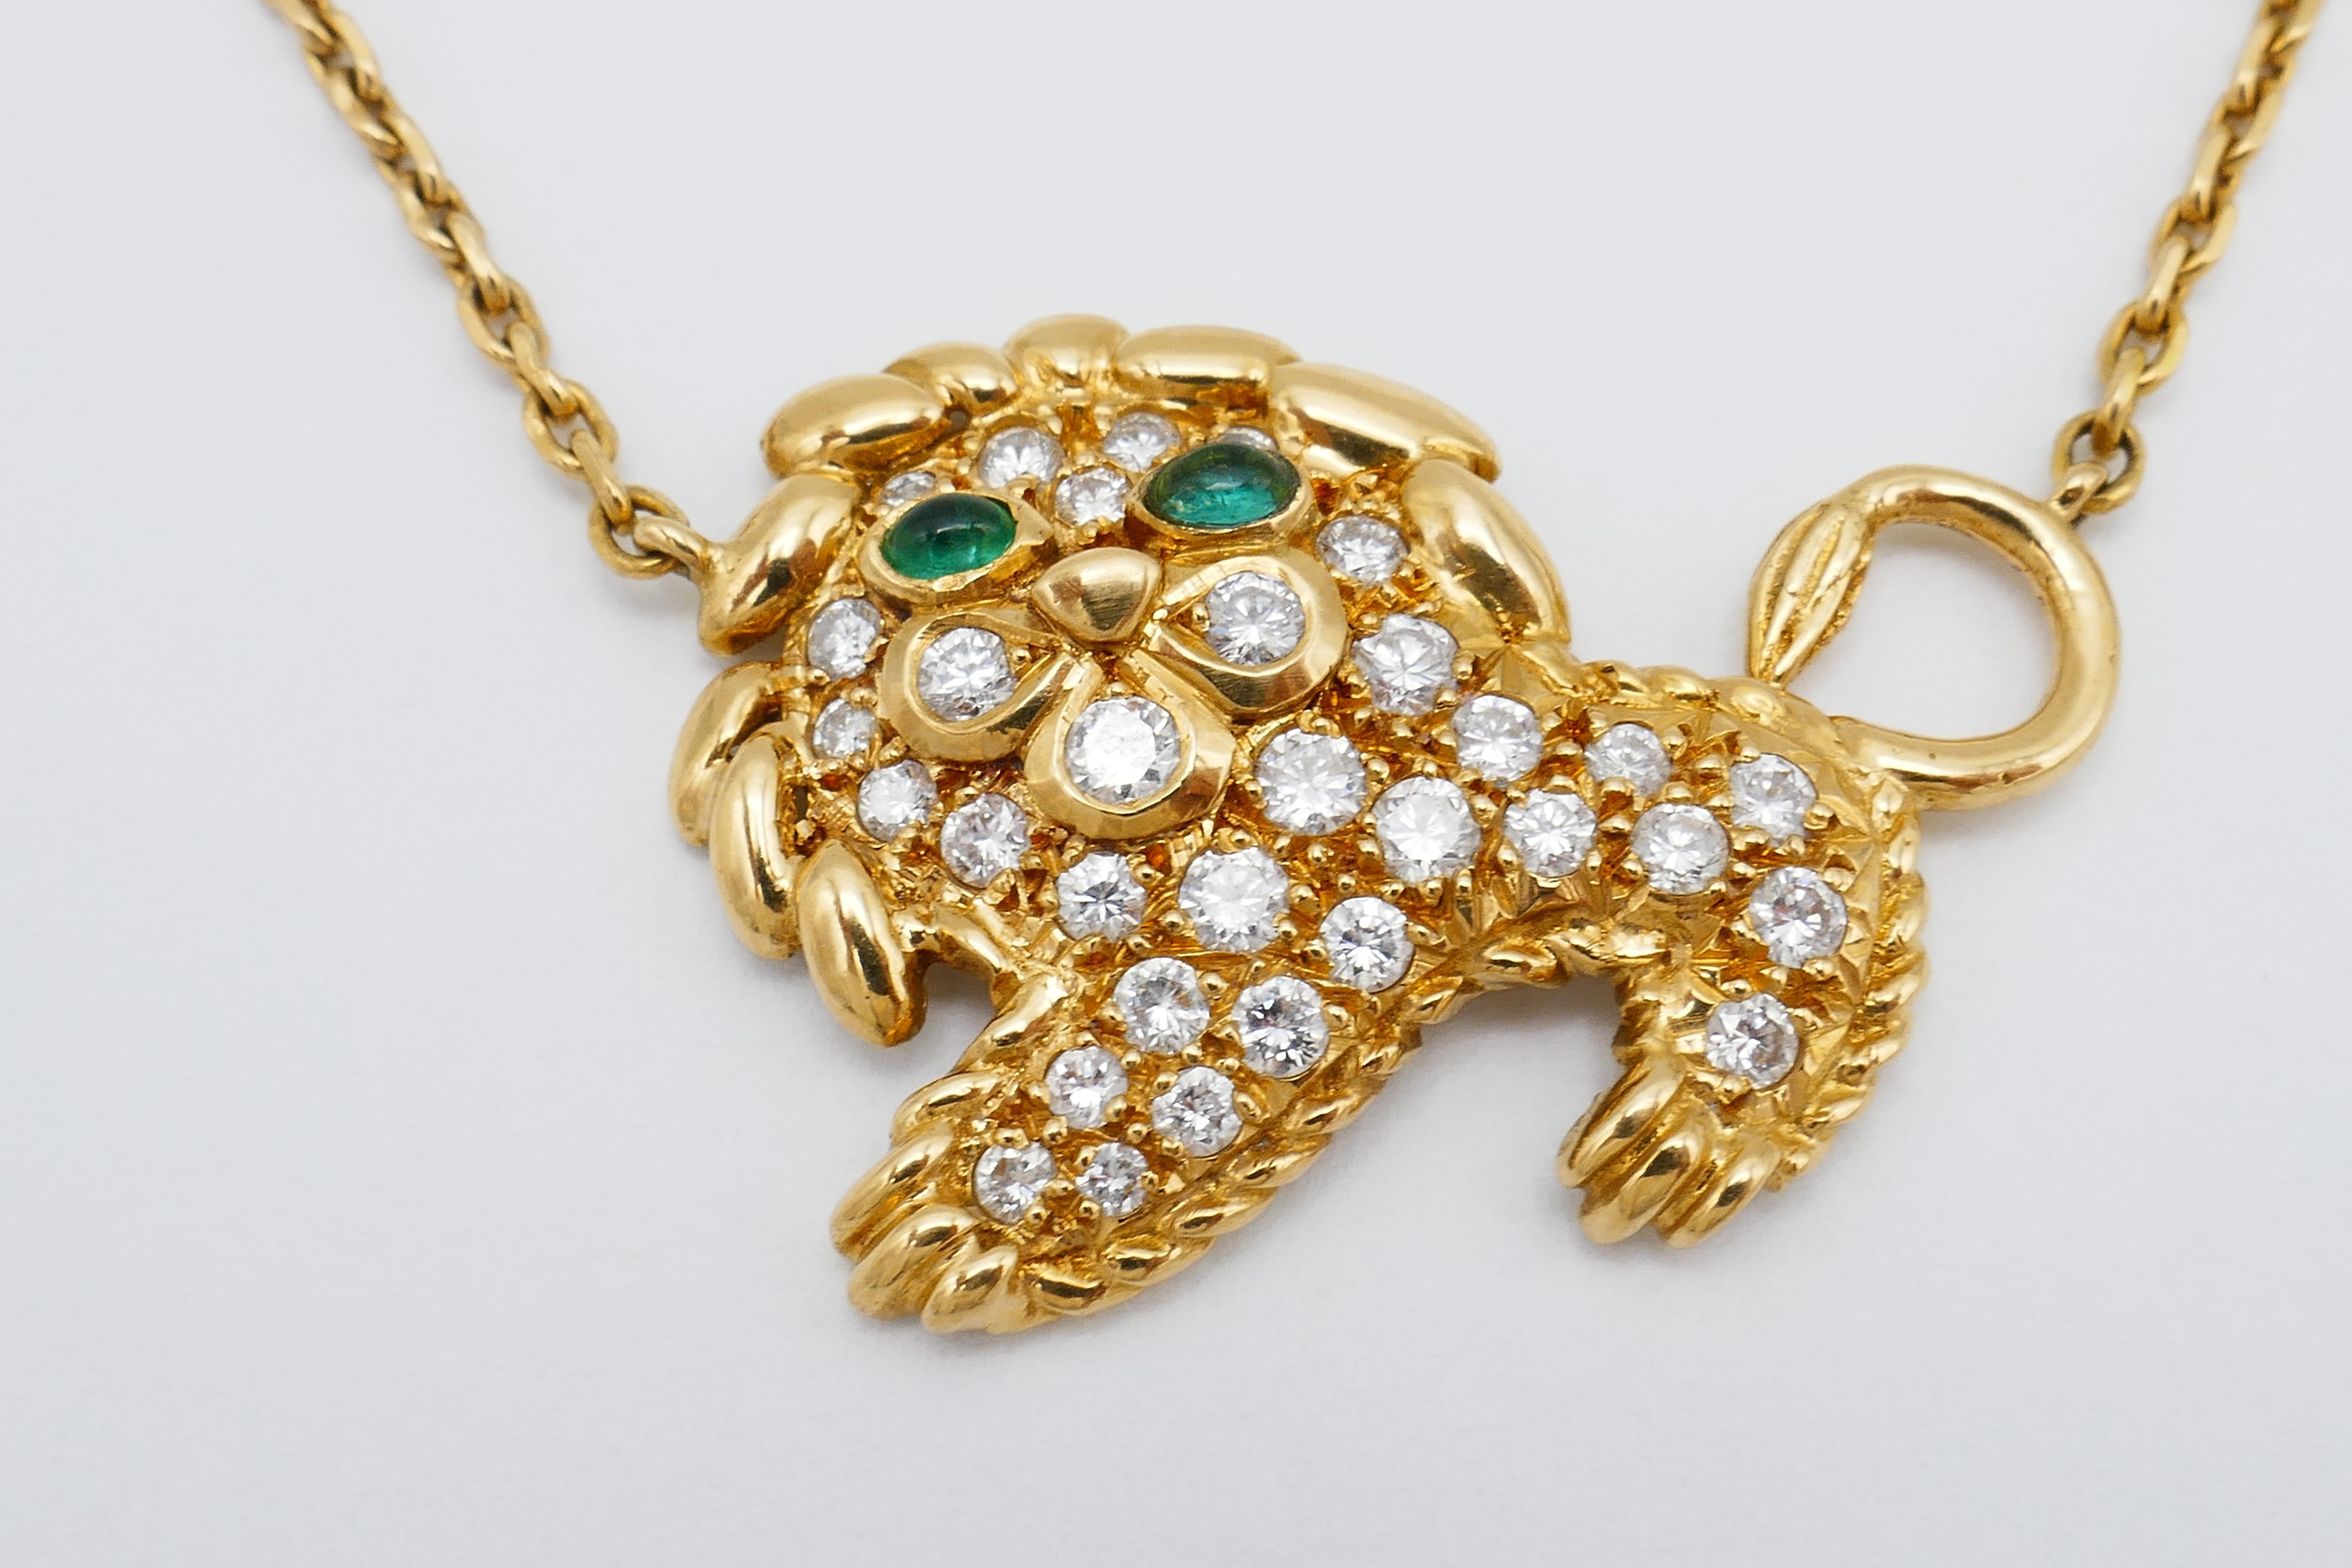 Fred Paris Necklace Leo Pendant Gold Diamond Emerald In Excellent Condition For Sale In Beverly Hills, CA